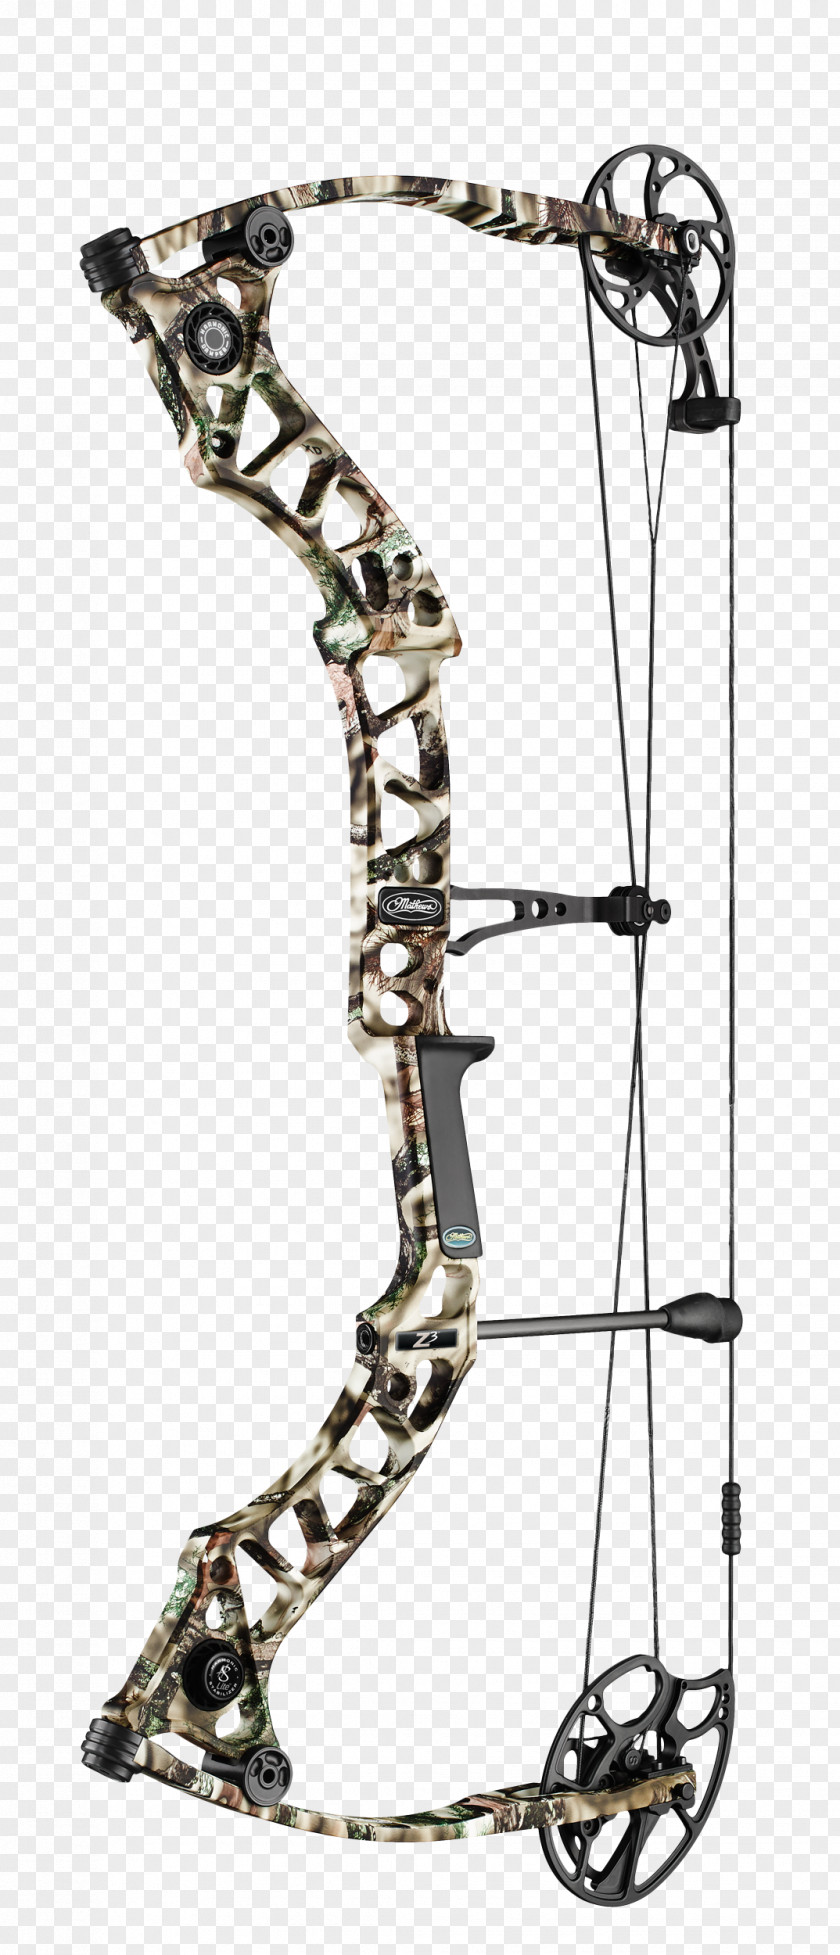 Sony Xperia Z3 Compound Bows Bow And Arrow Bowhunting Archery PNG